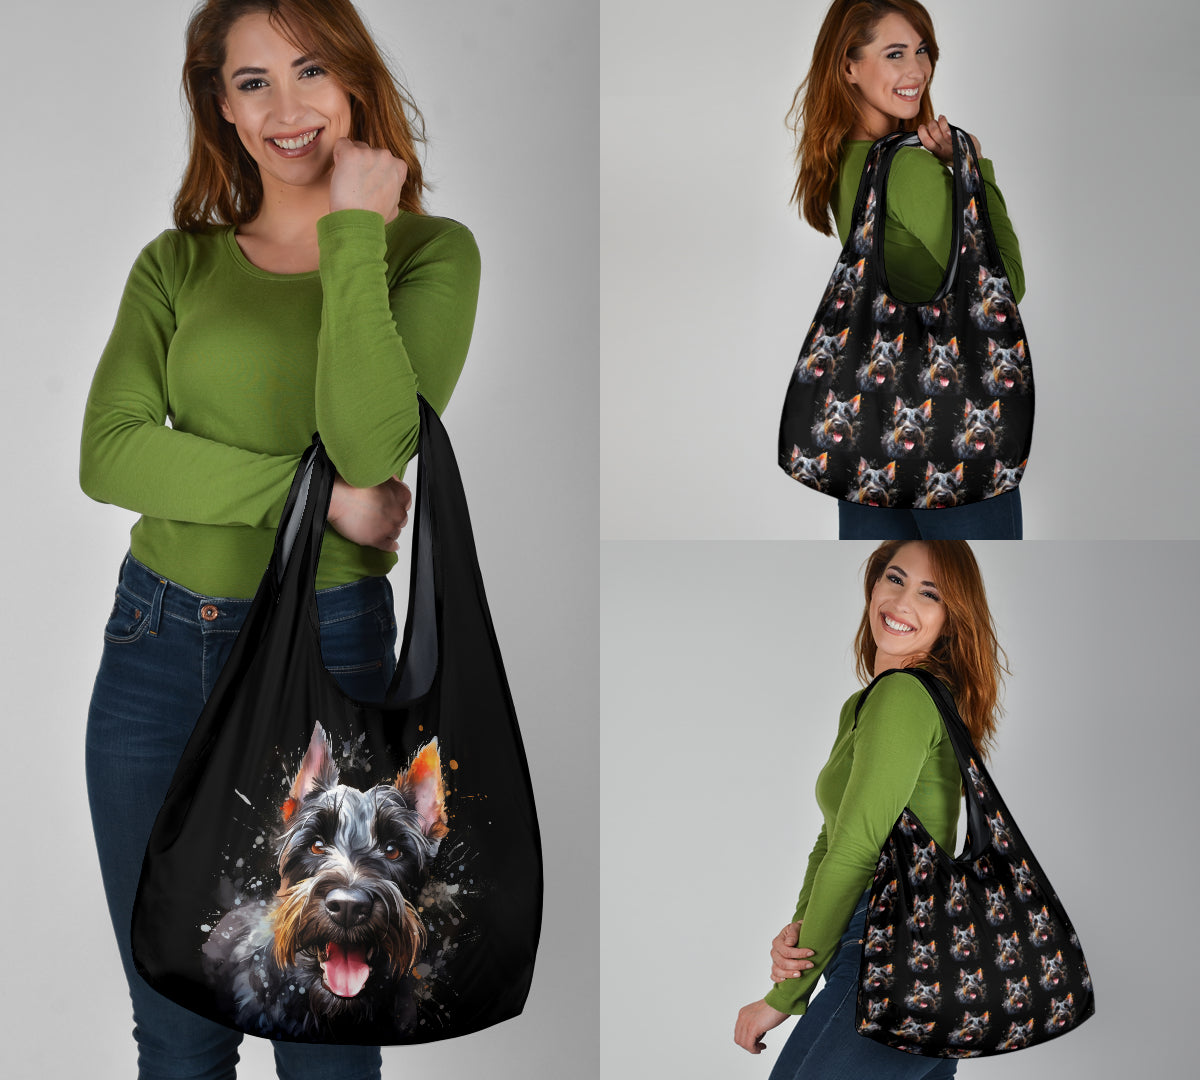 Scottish Terrier Watercolor Design 3 Pack Grocery Bags